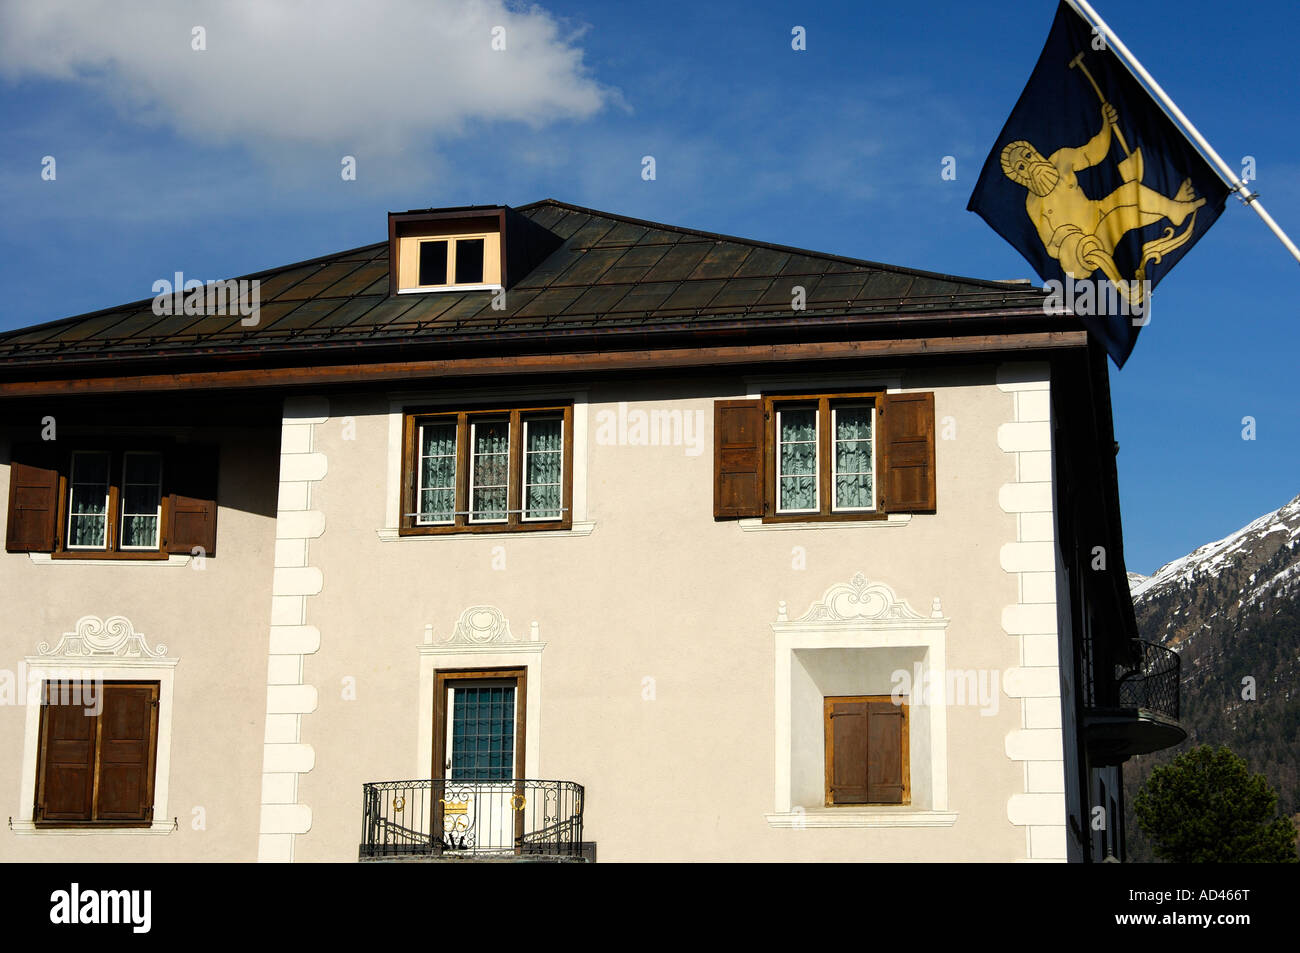 Traditional Engadine house and flag with coat of arms, Samedan, Upper Engadine, Graubuenden, Grisons, Switzerland Stock Photo